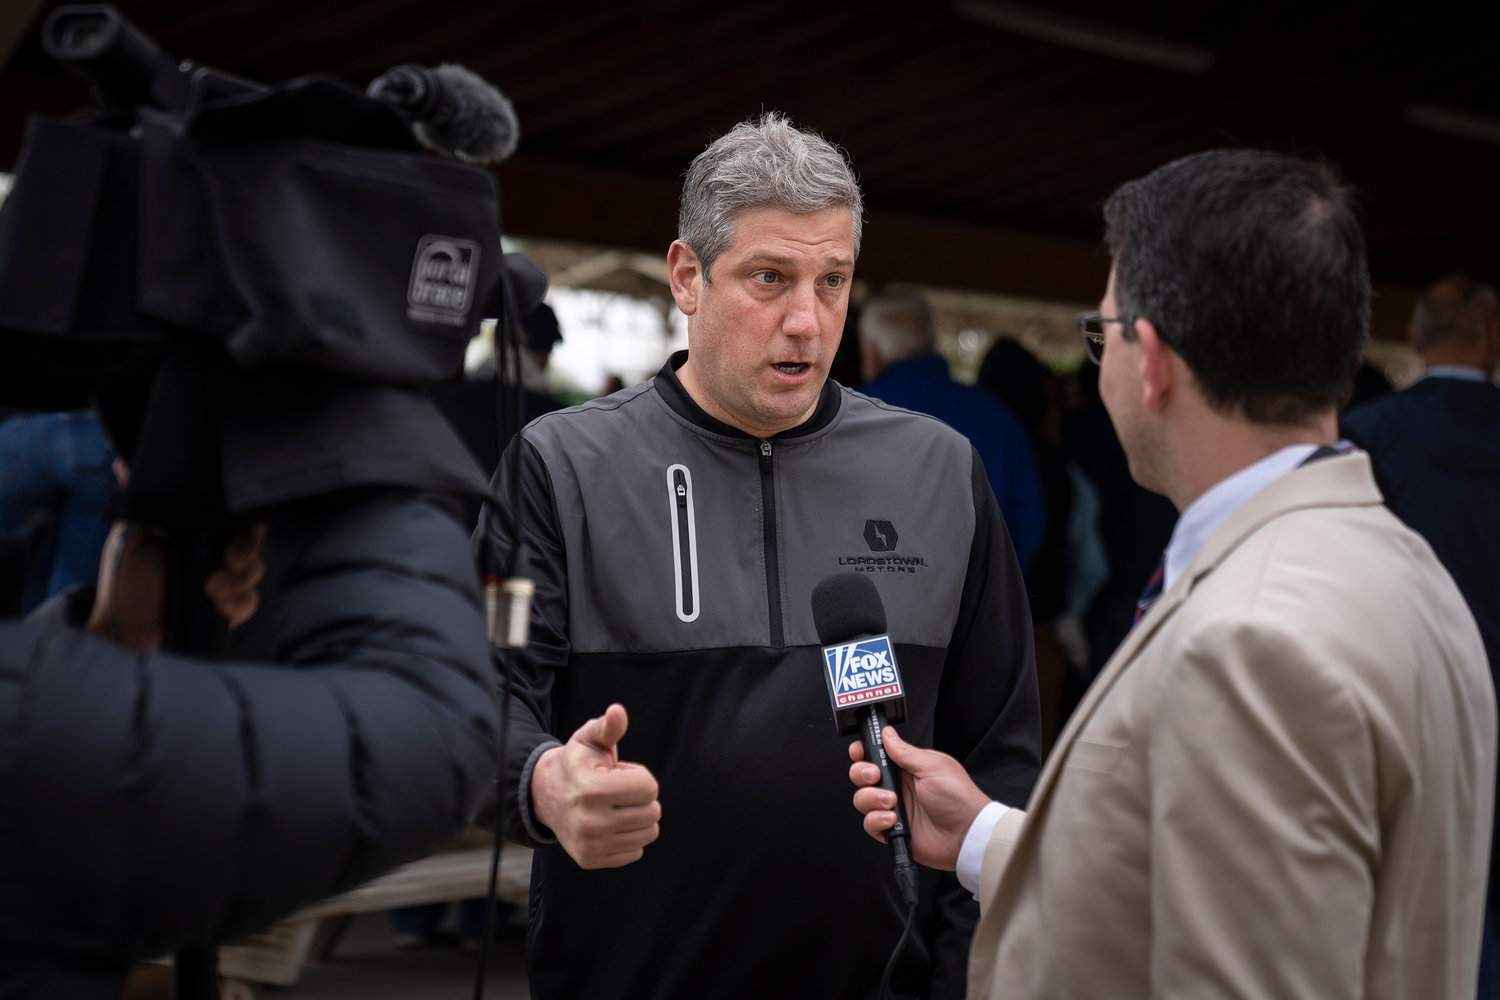 U.S. Rep. Tim Ryan, Democratic candidate for U.S. Senate in Ohio, speaks with Fox News during a rally in support of the Bartlett Maritime project, a proposal to build a submarine service facility for the U.S. Navy, on May 2, 2022, in Lorain, Ohio. (Drew Angerer/Getty Images/TNS)